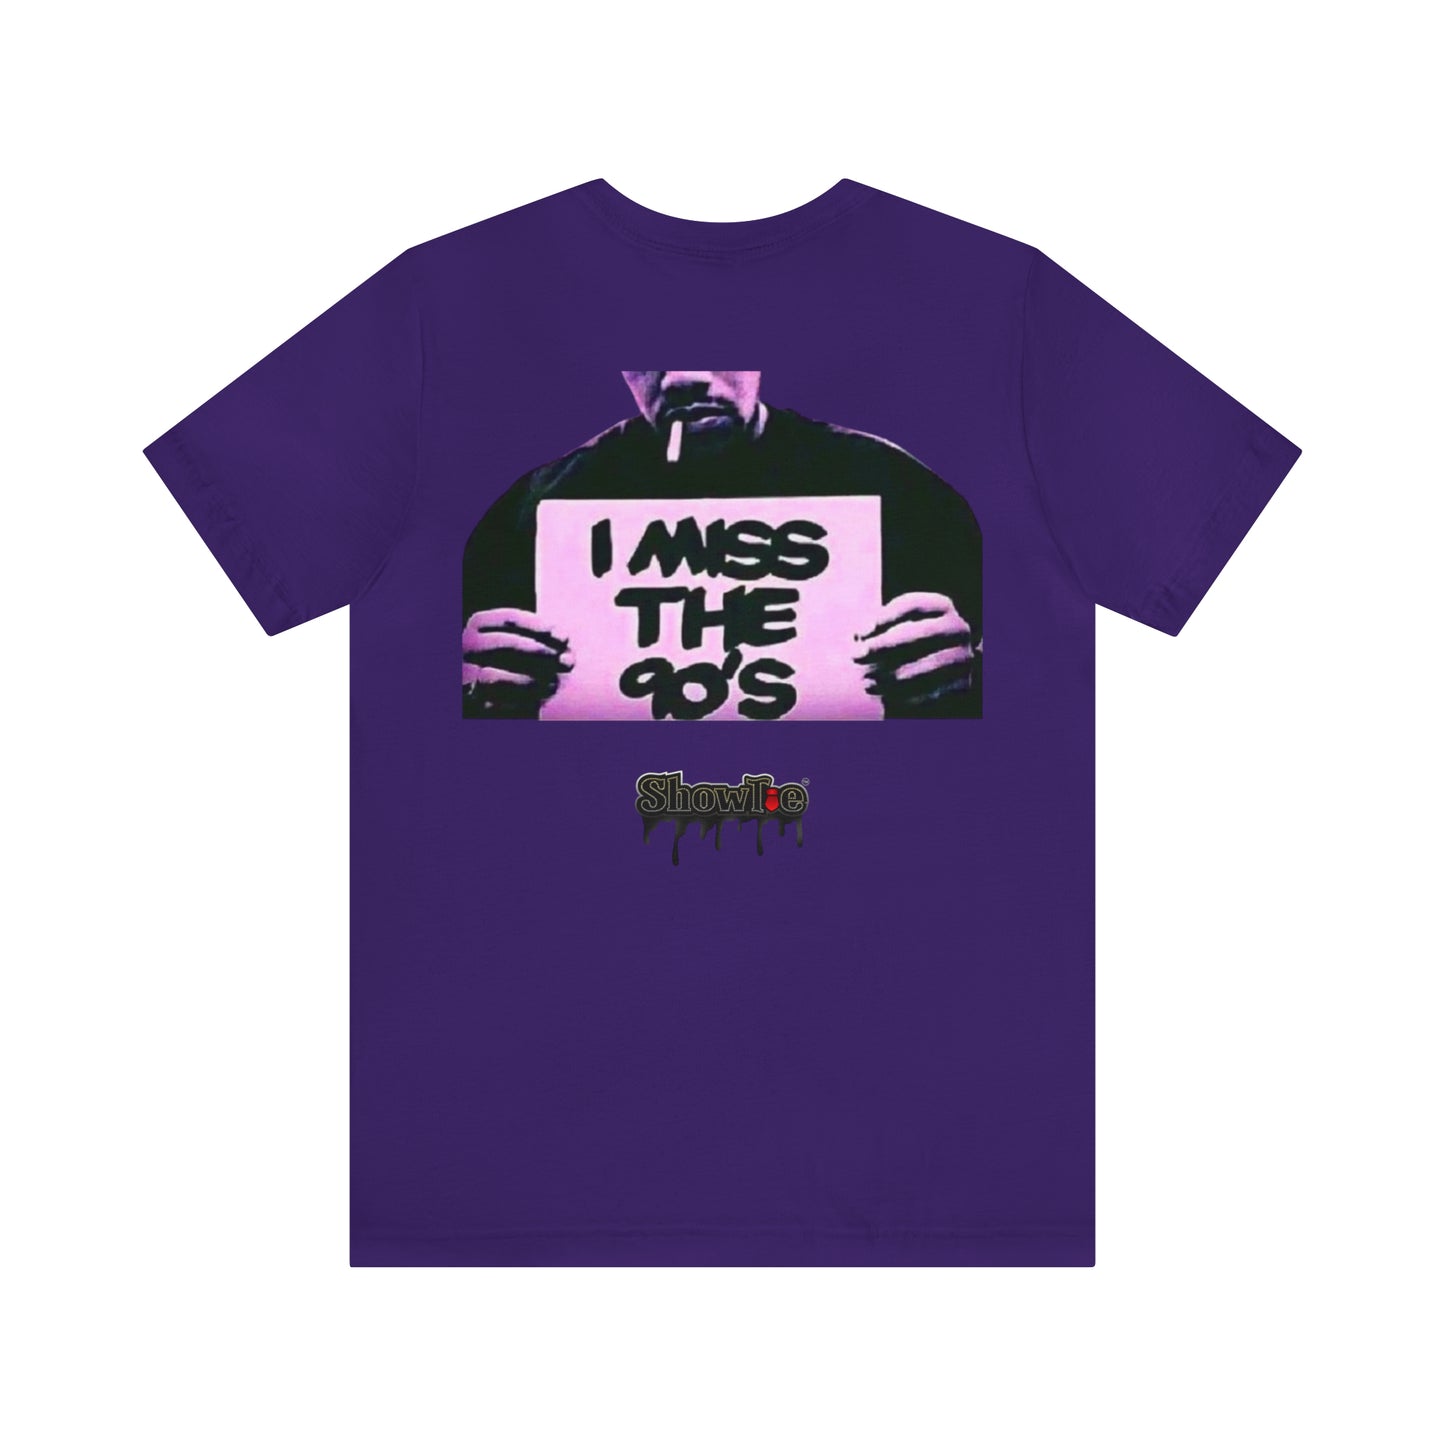 Missing You Showtie Tee